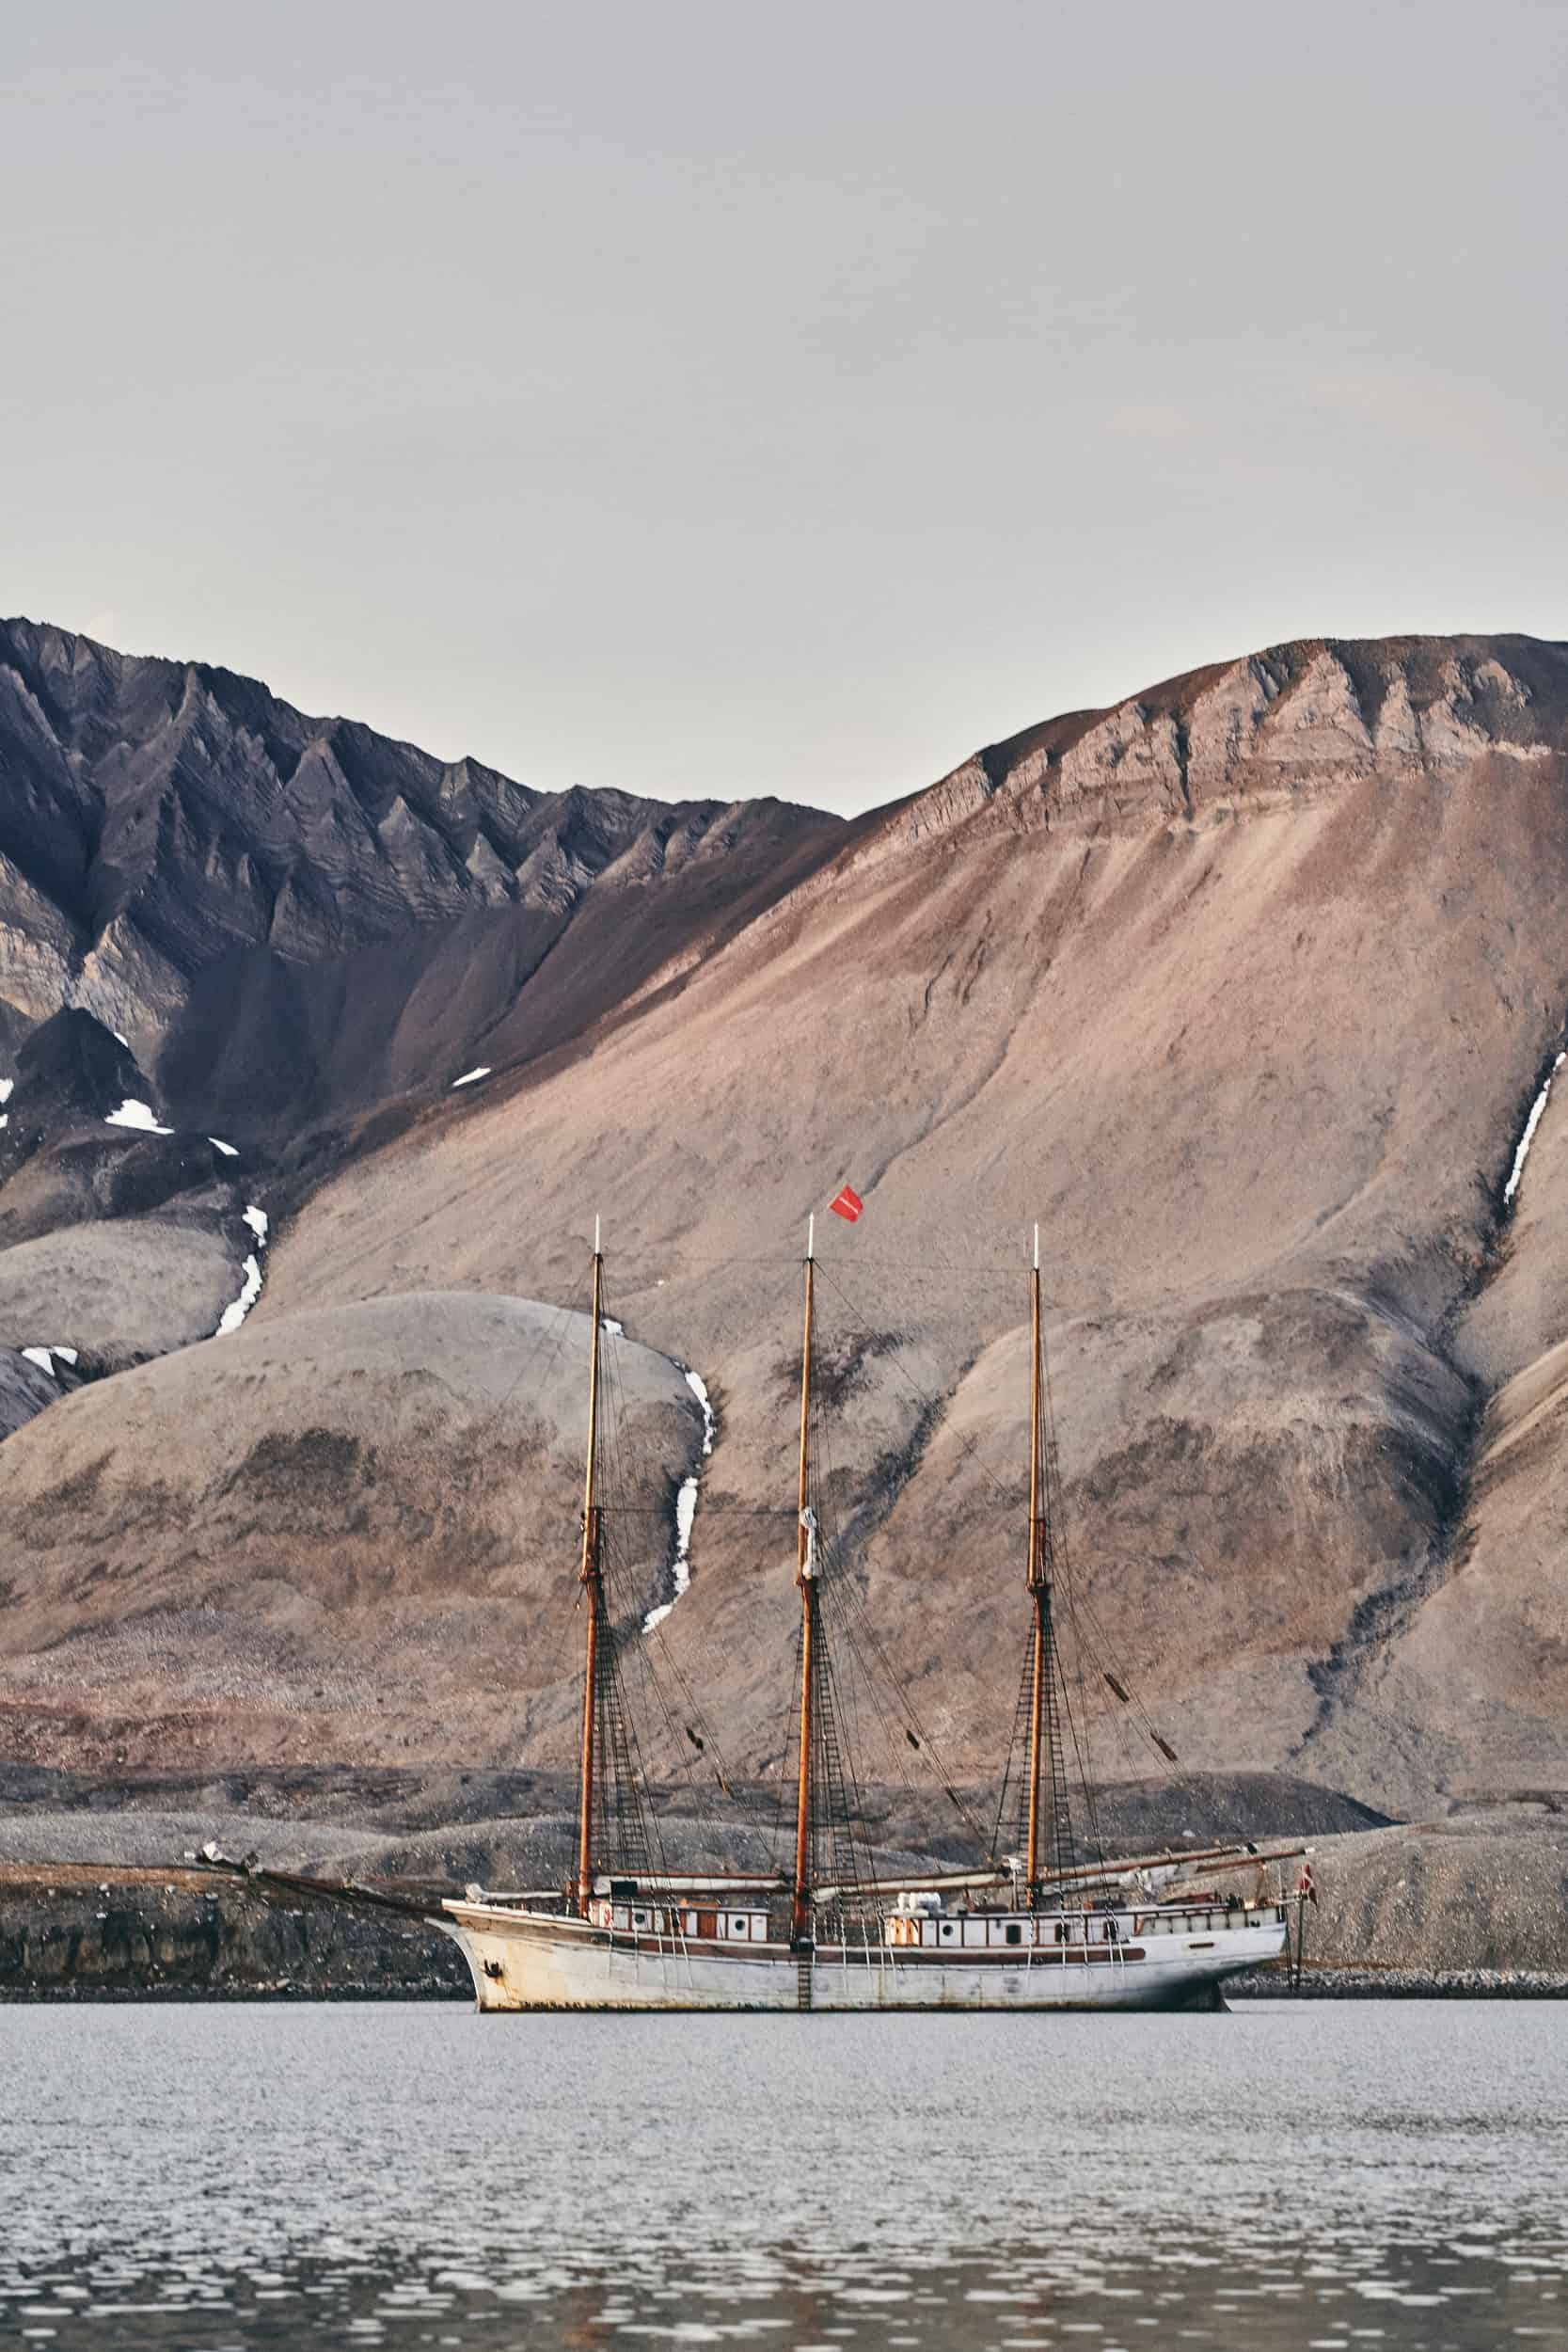 Sailing schooner in front of a rocky background on the shore of Svalbard. Fascinating geology and citizen science projects in the Arctic through Classic Sailing.